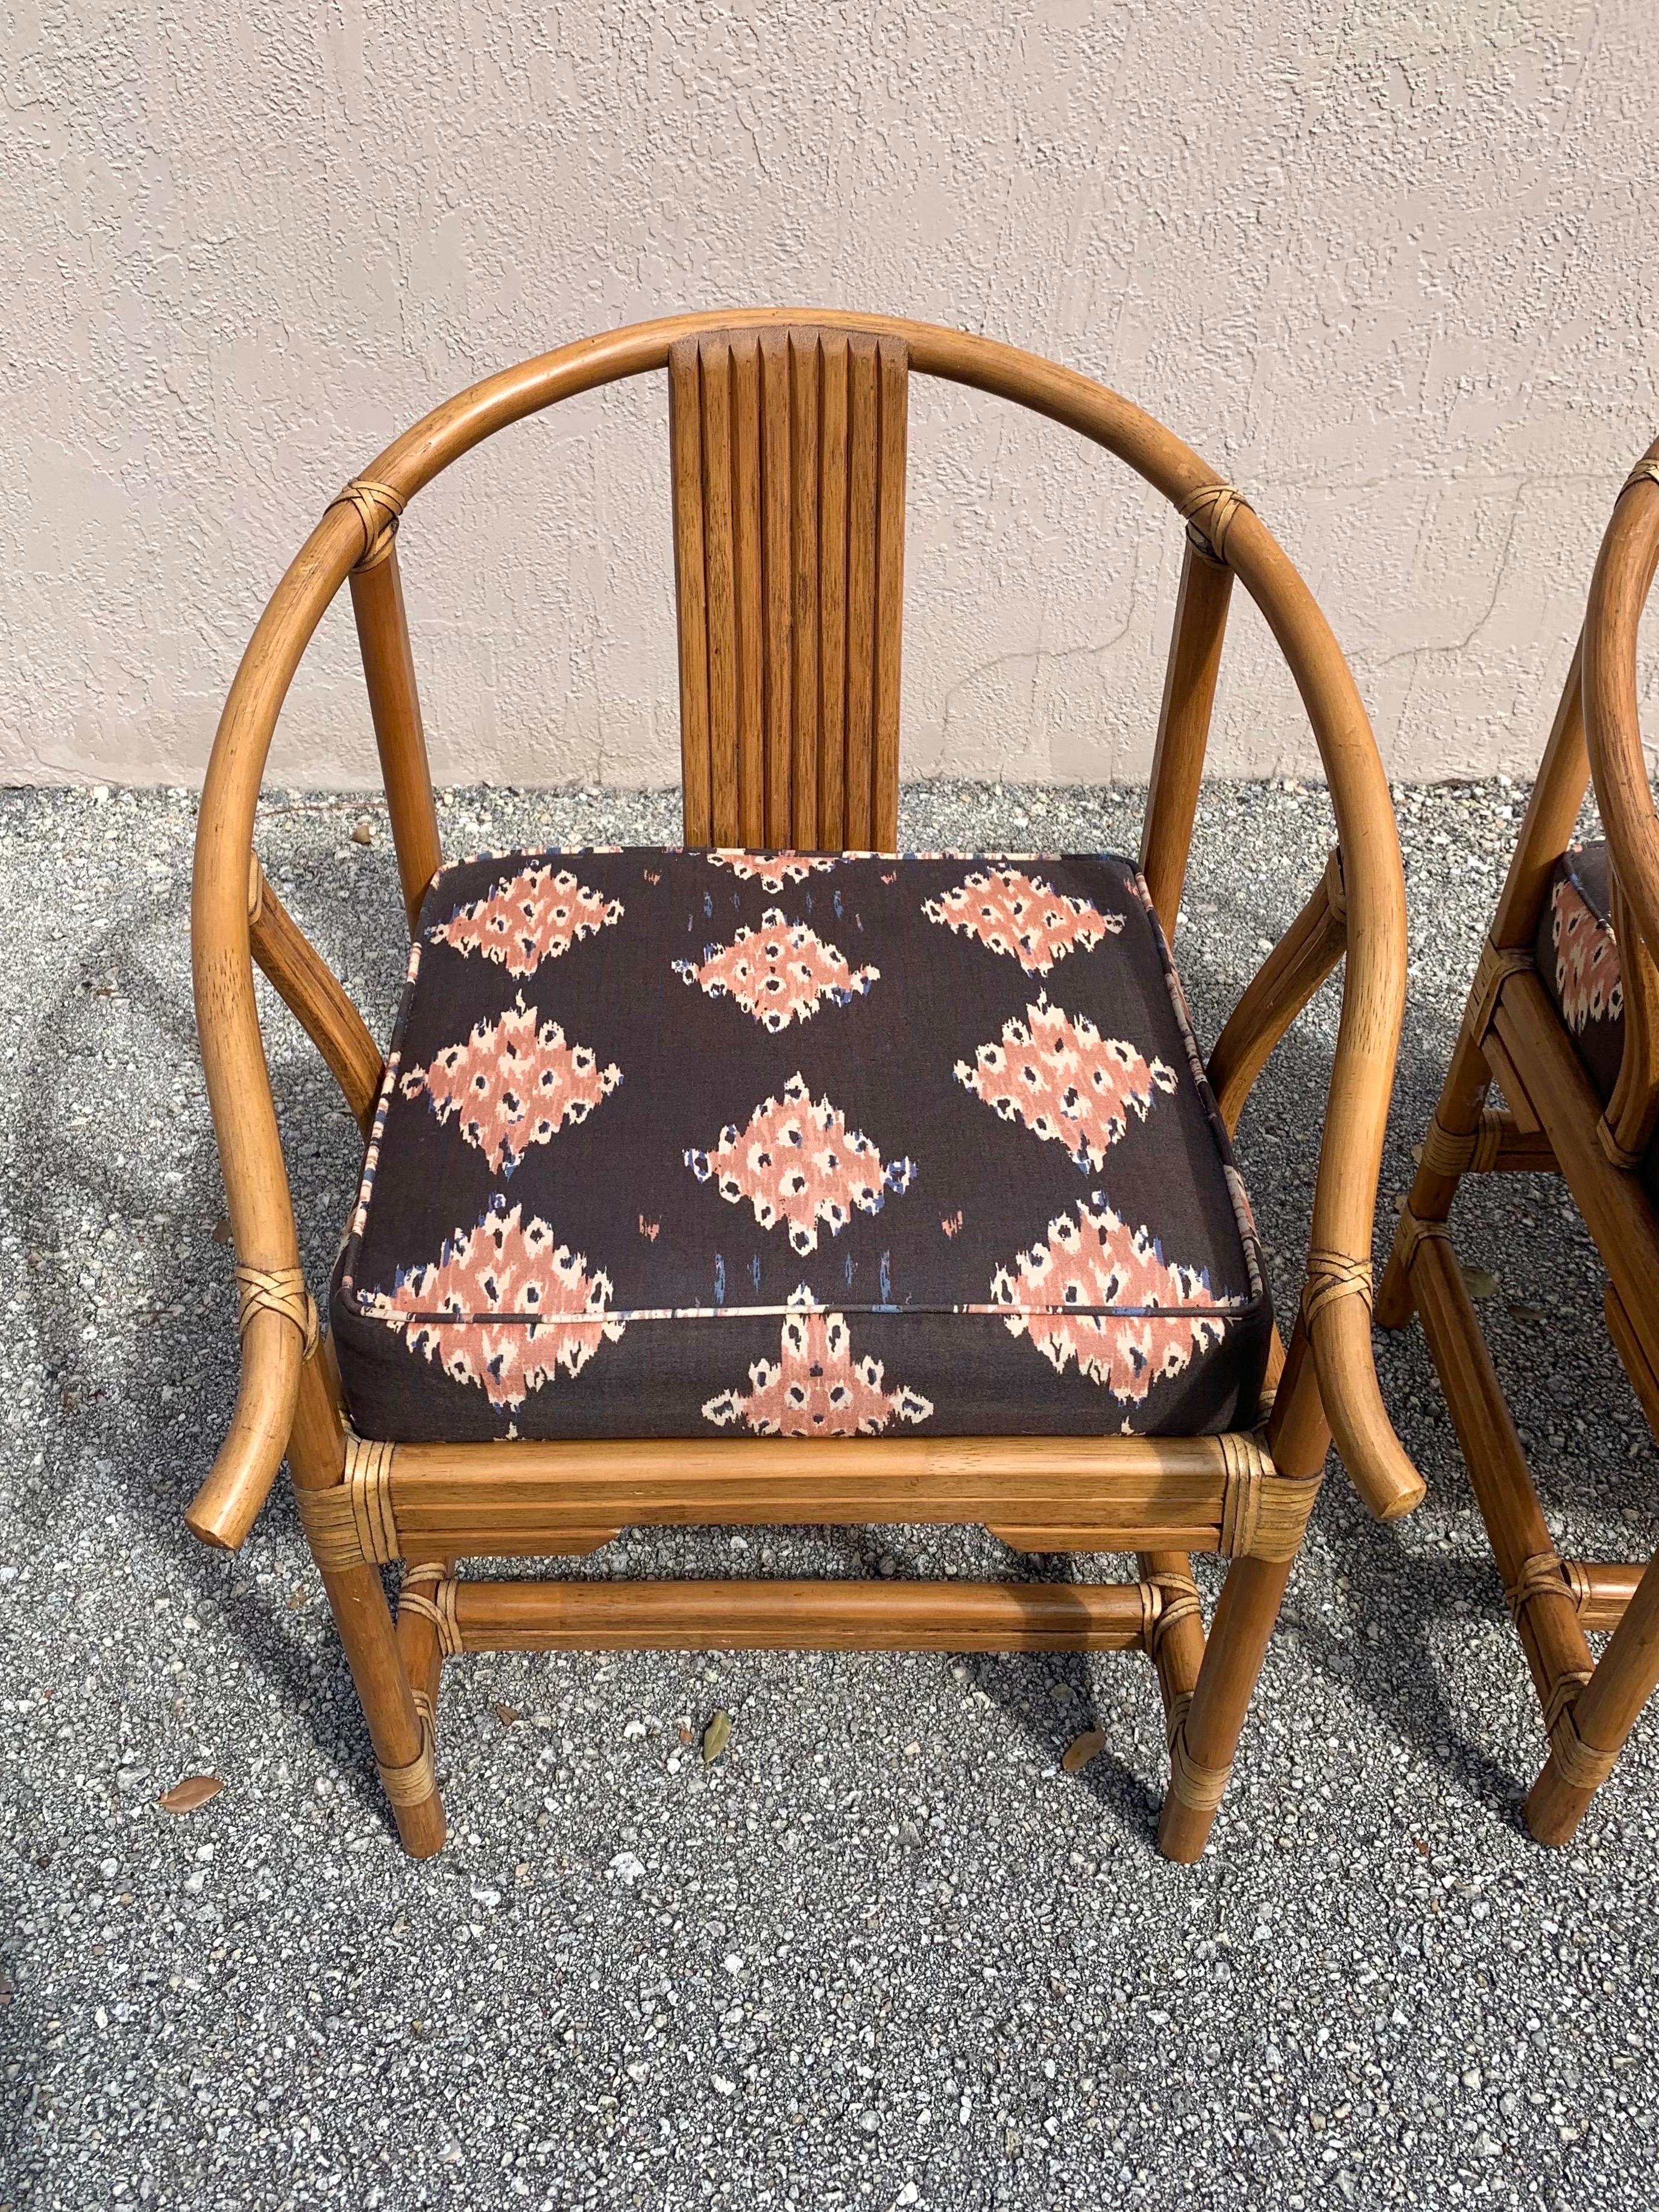 Vintage Organic Modern Chairs by Ficks Reed In Good Condition For Sale In Boynton Beach, FL